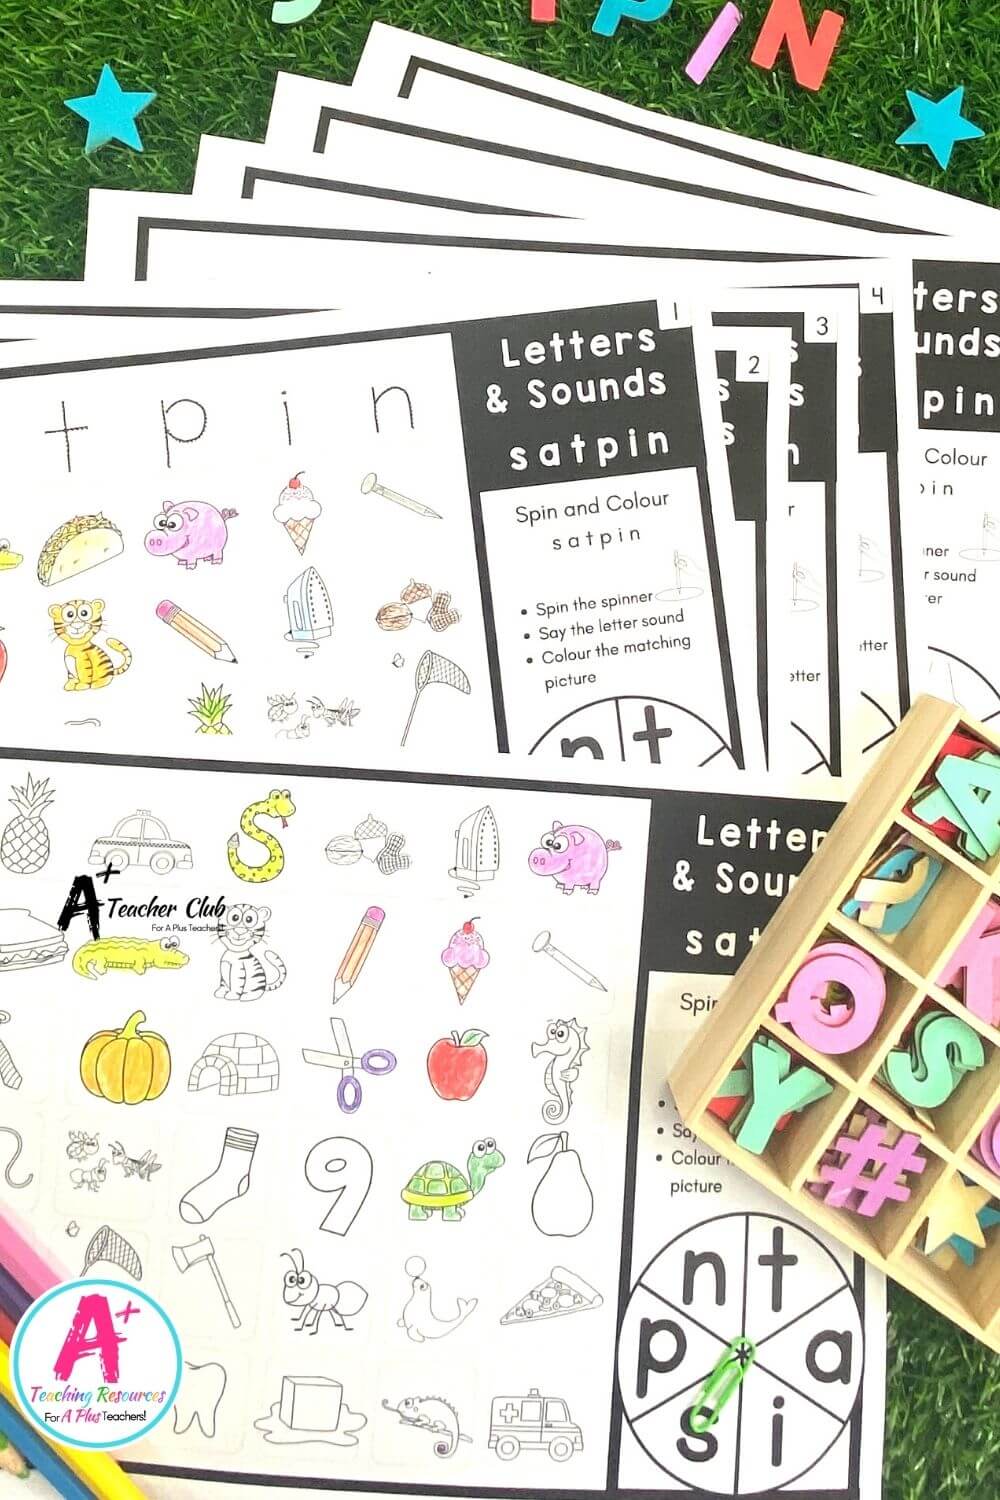 SATPIN Spin & Colour Worksheets (B&W LOWER CASE)